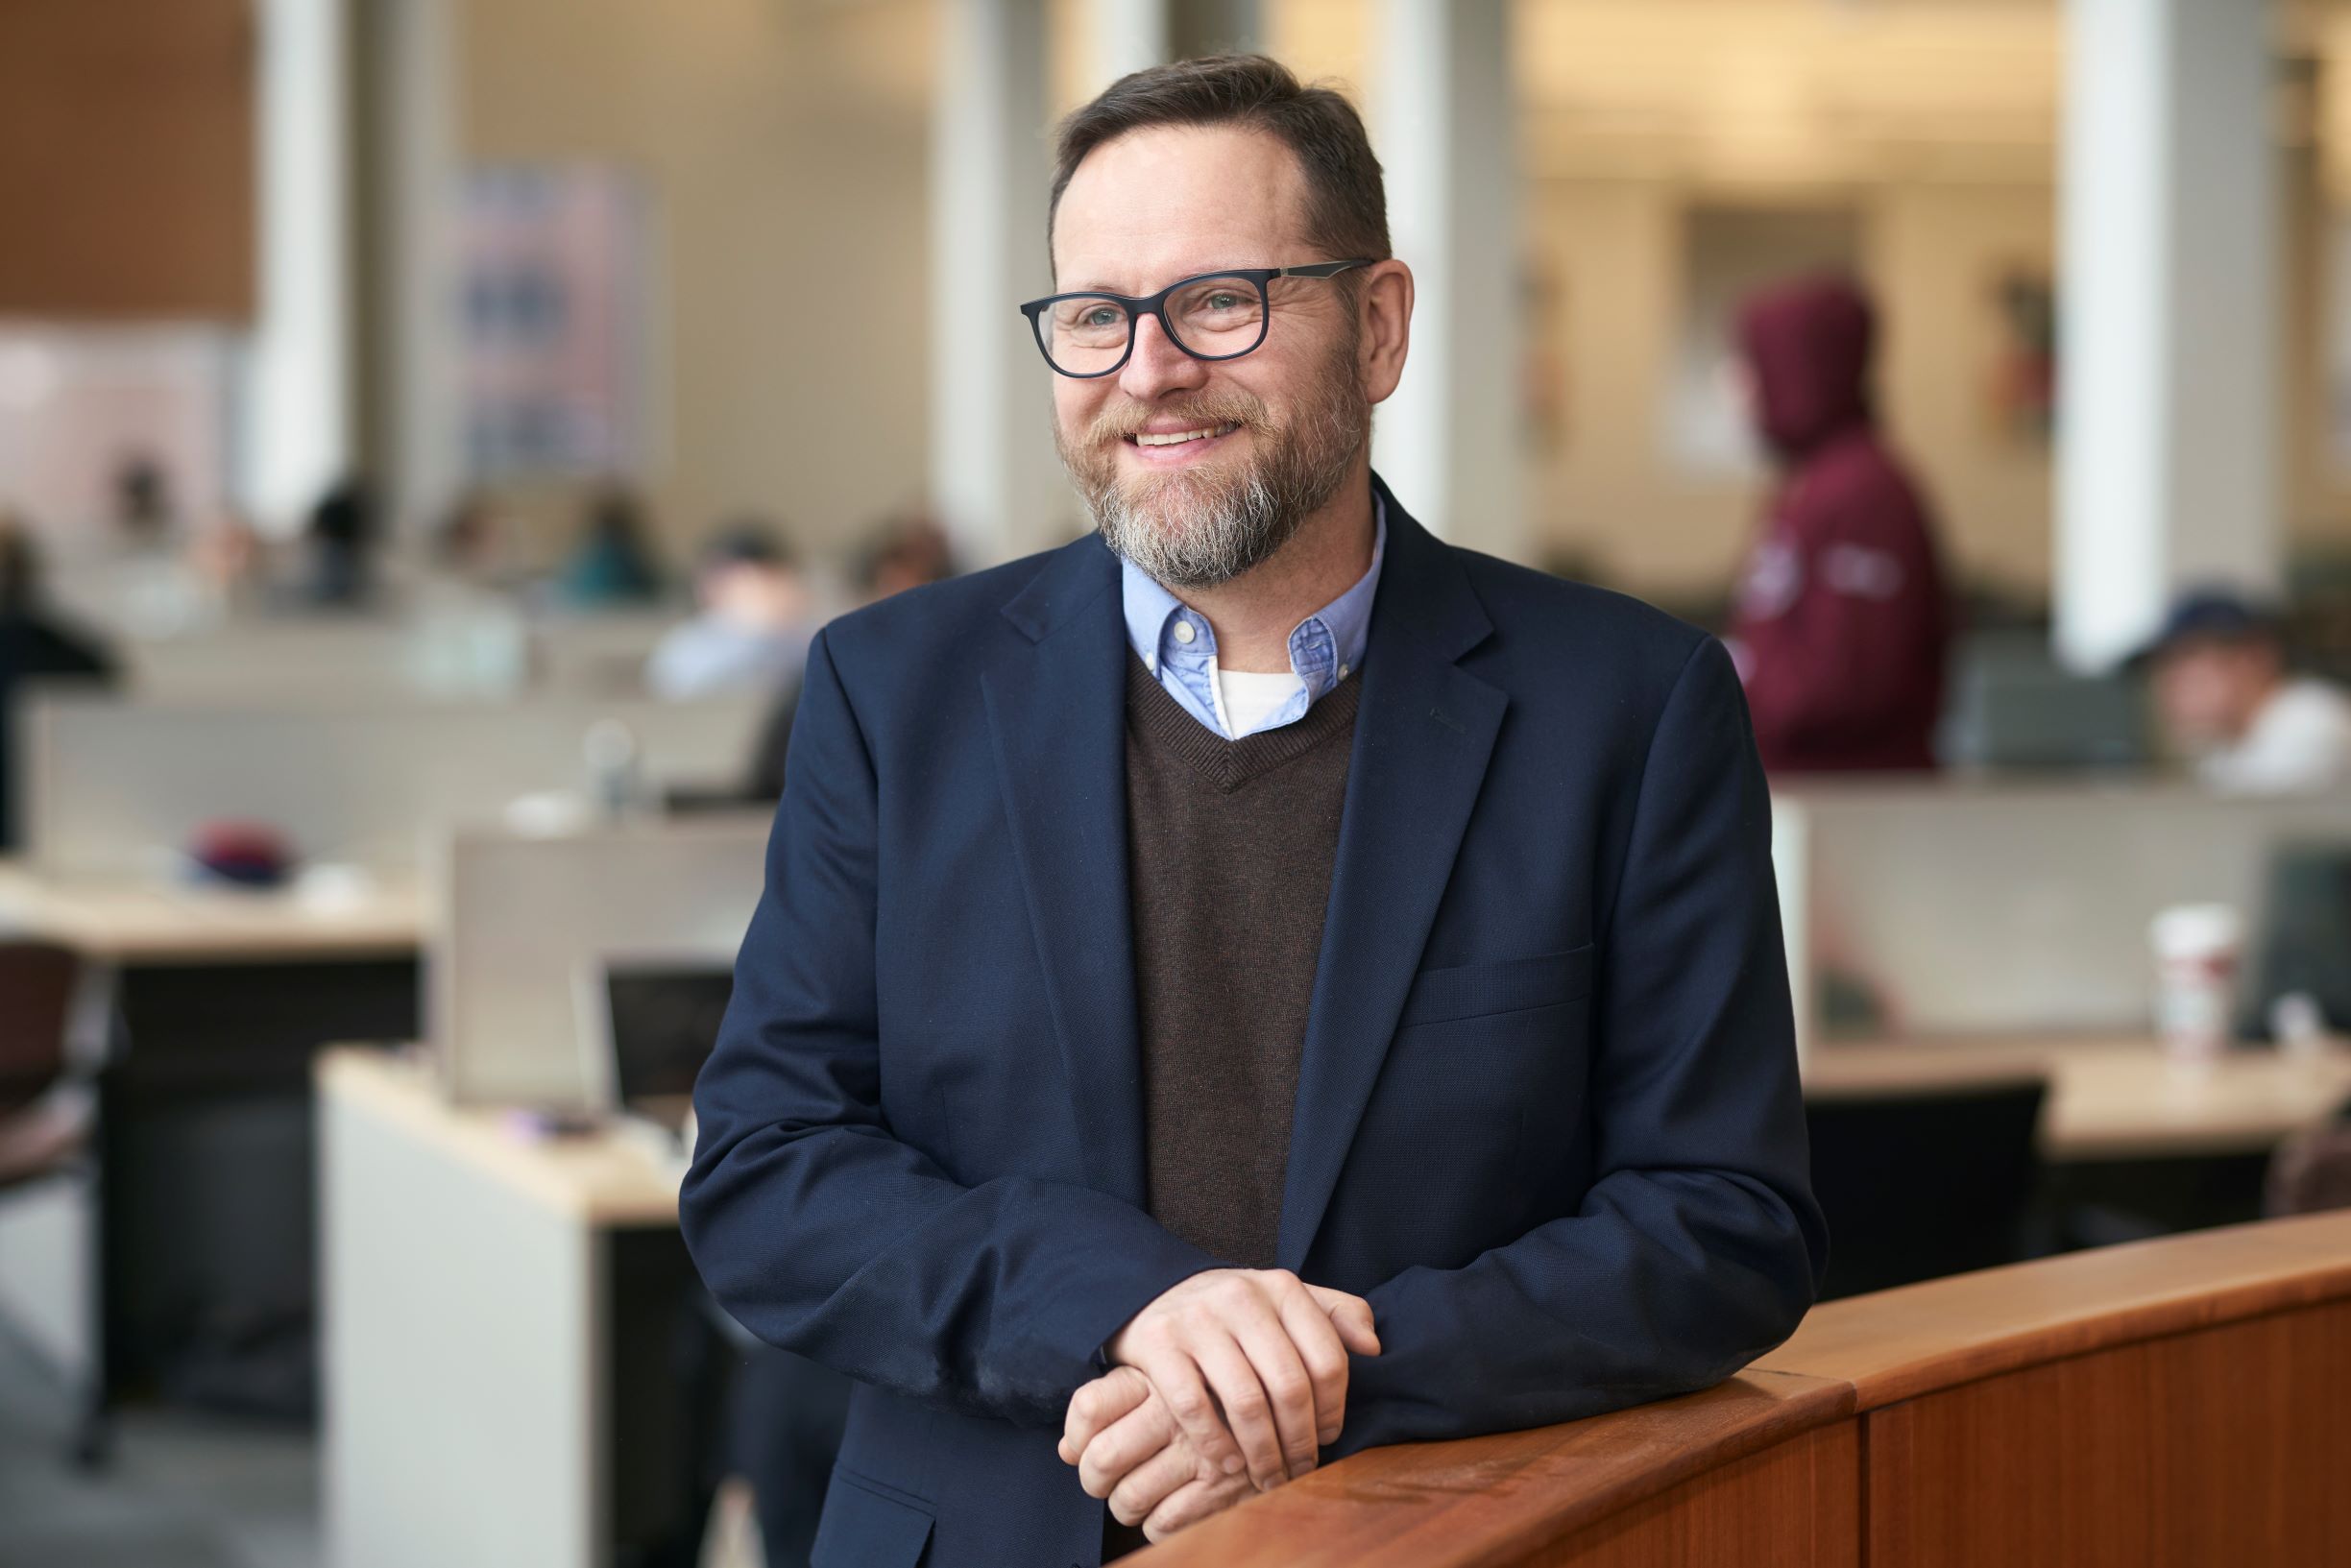 Dr. Andrew Webb, faculty member of Carleton University’s Sprott School of Business and Co-Director at the Centre for Research on Inclusion at Work (CRIW)